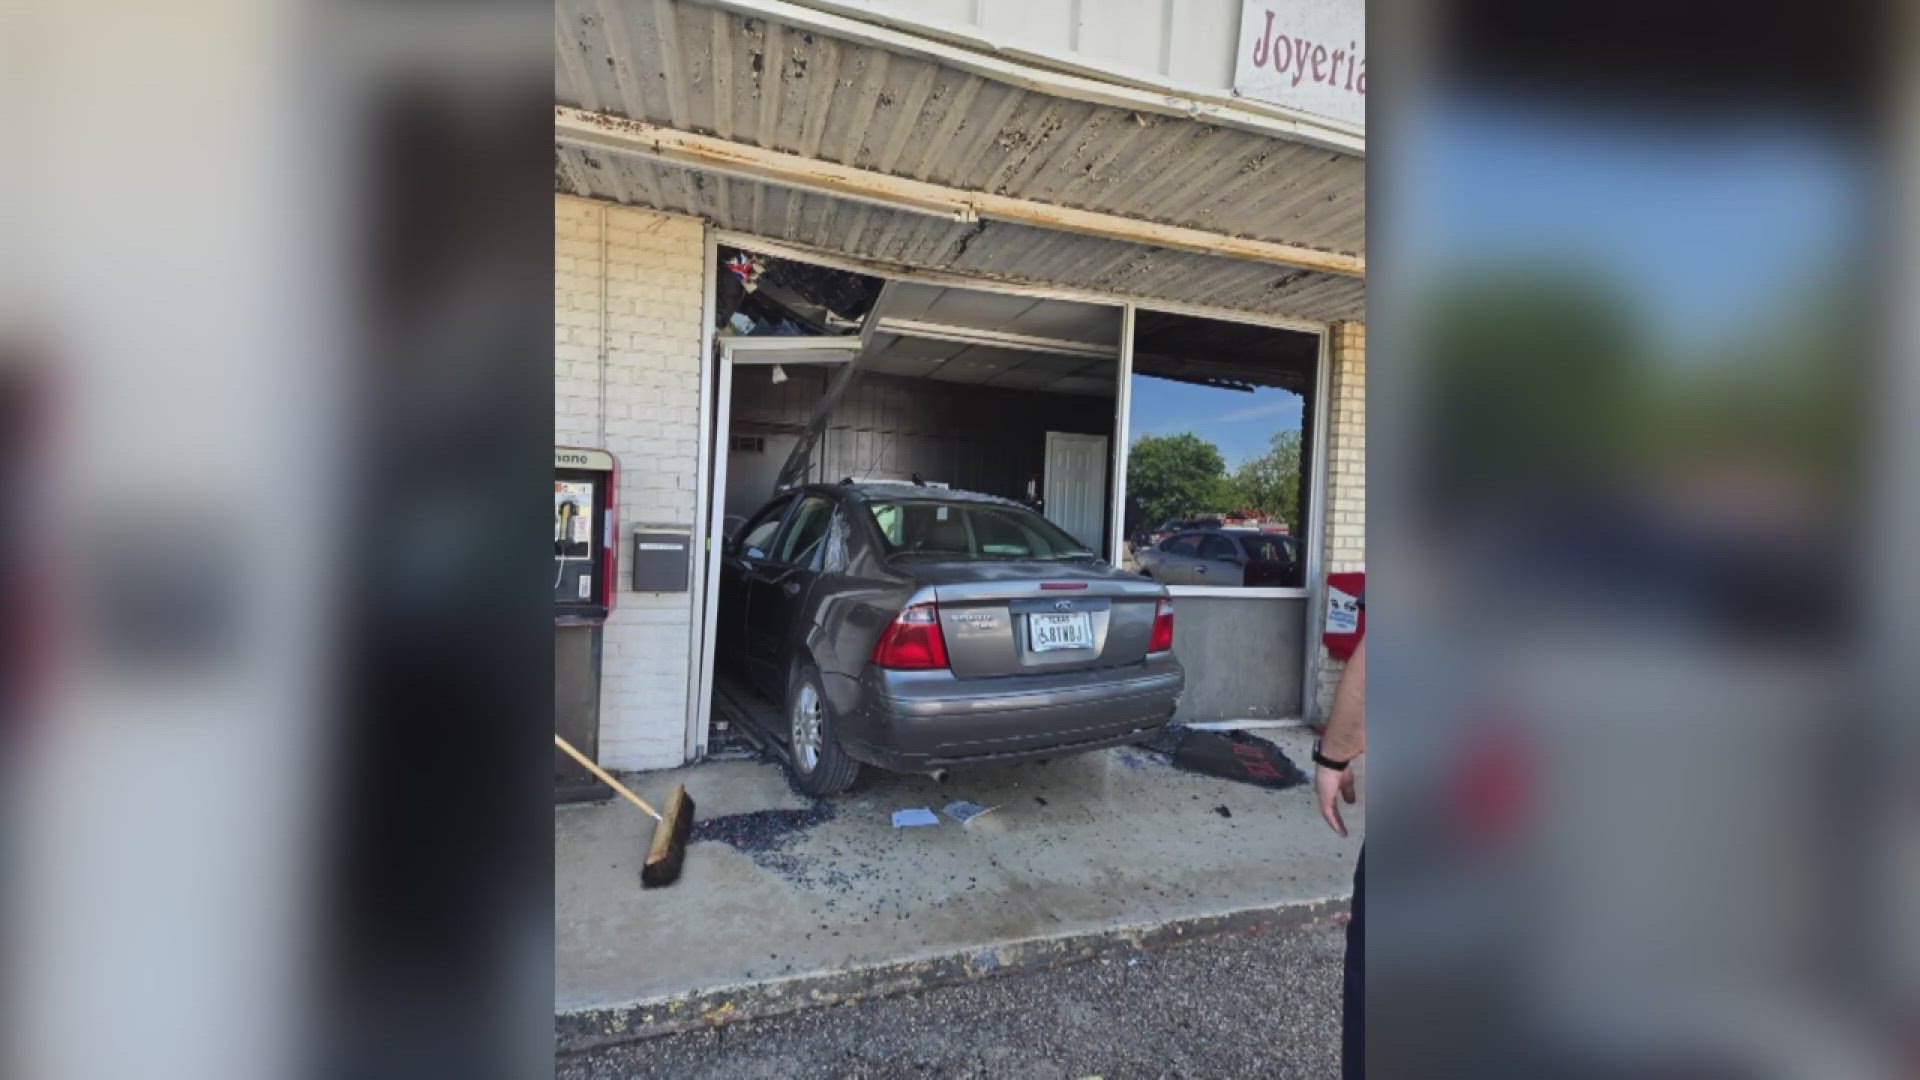 The car plowed into Jewelry & Repair, located on 3rd Street and West Nugent Avenue, a little after 9:30 a.m., property manager Mike Lockett told 6 News.